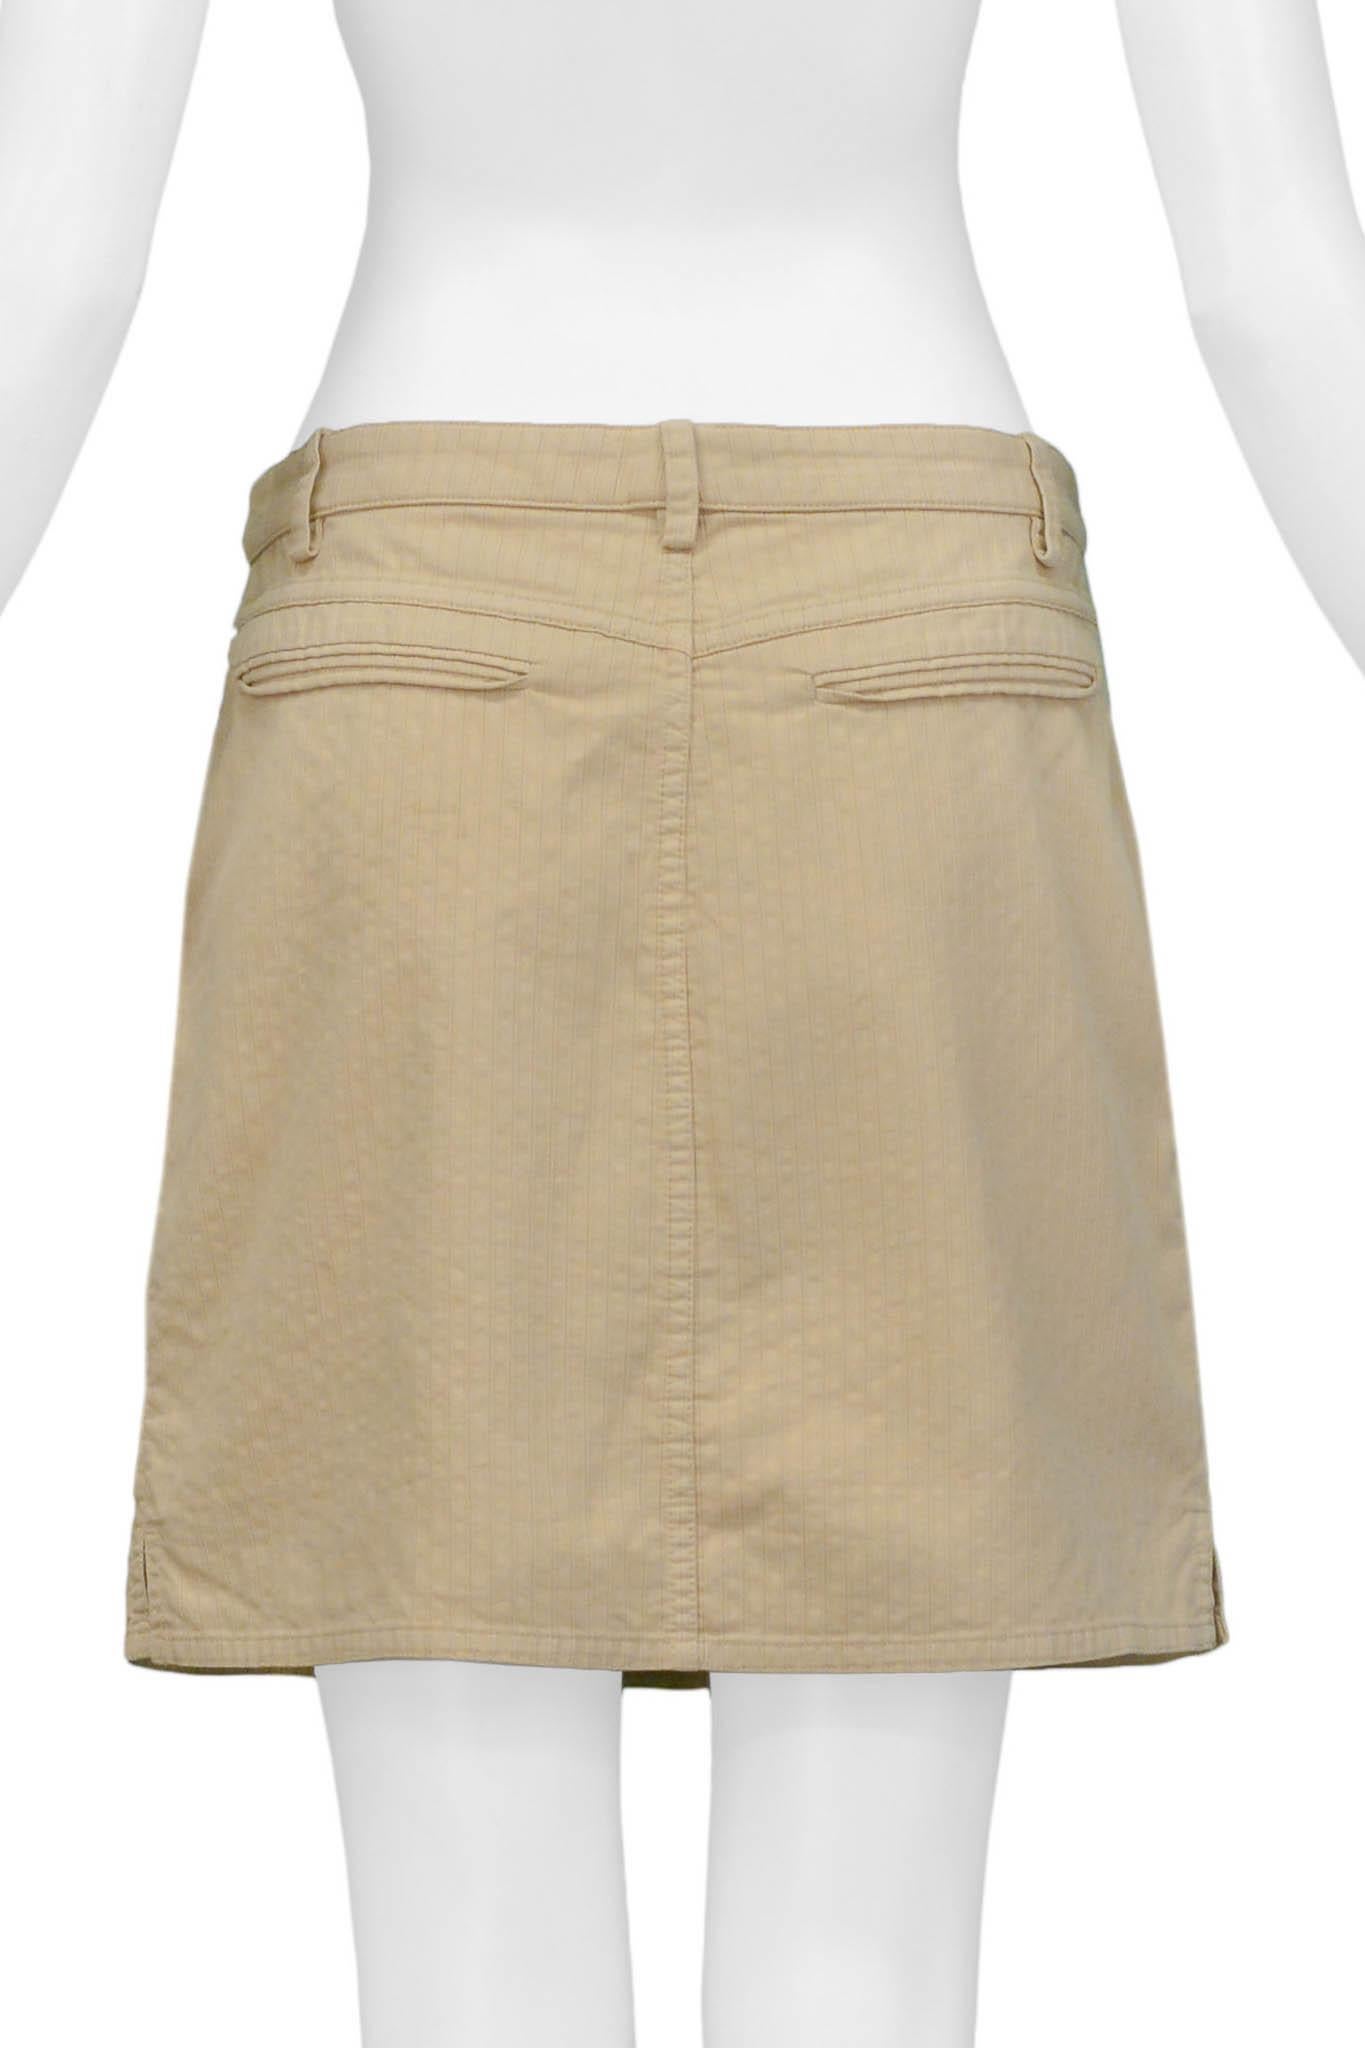 Balenciaga Khaki Pocket Mini Skirt In Excellent Condition For Sale In Los Angeles, CA